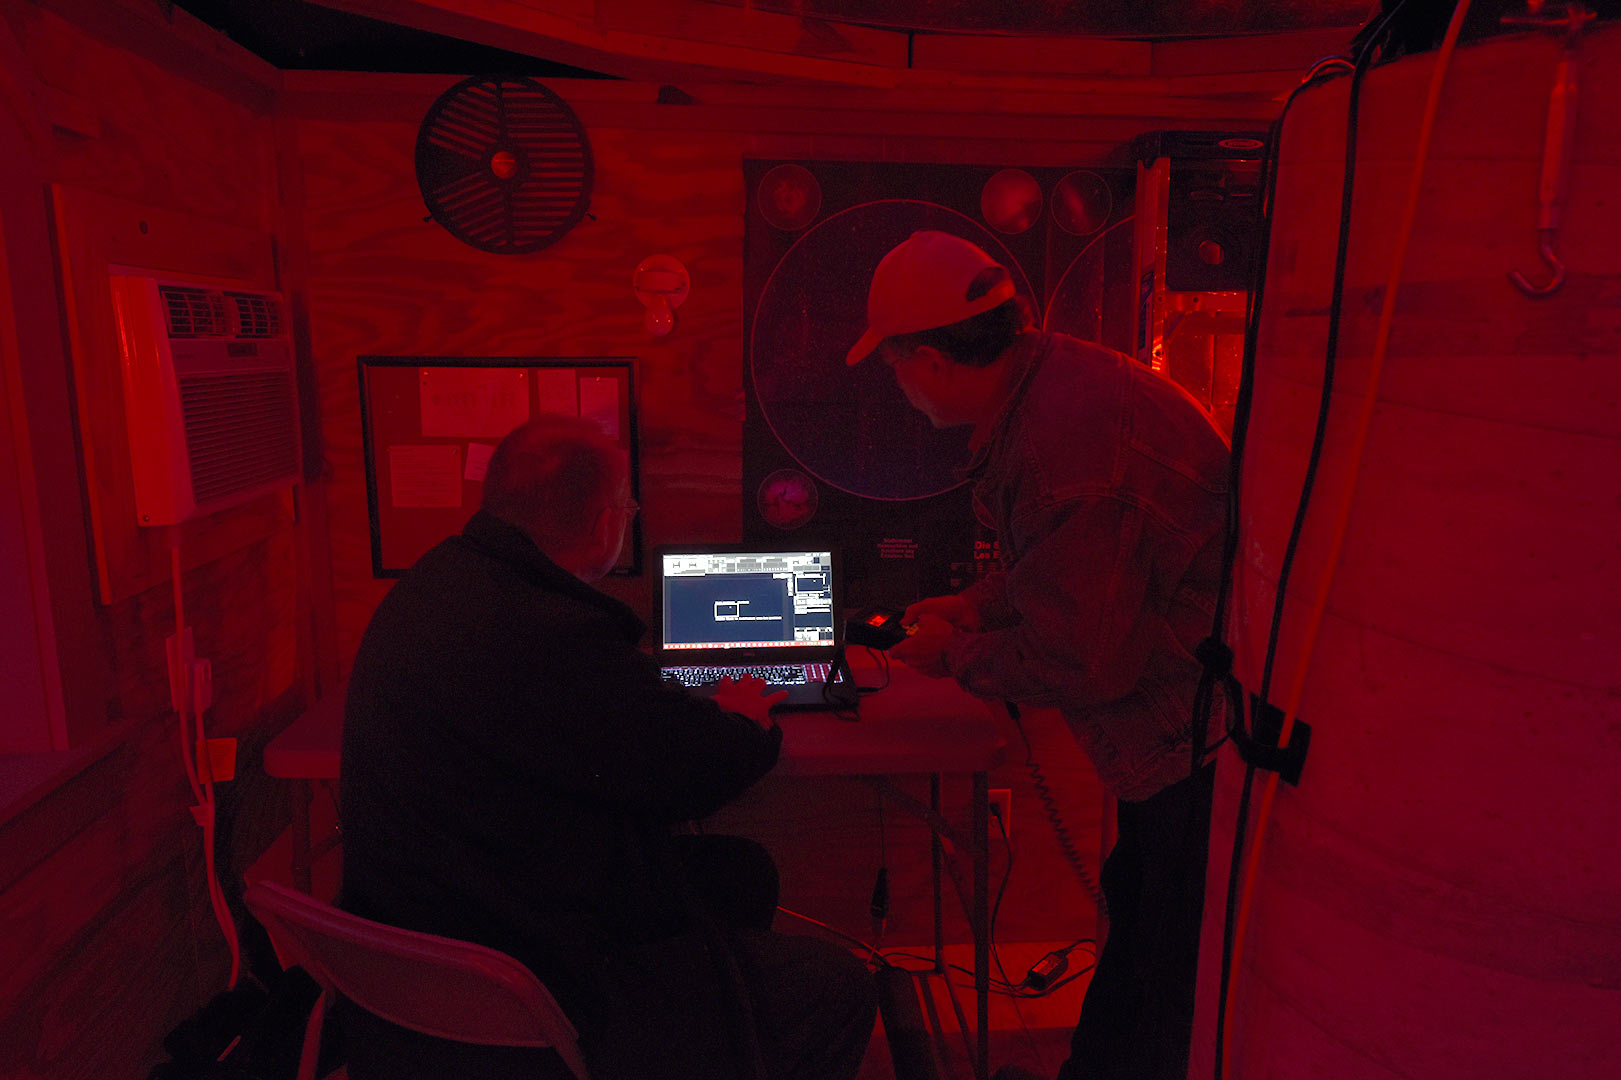 Dr Spearman and Dr Light observing at a star party